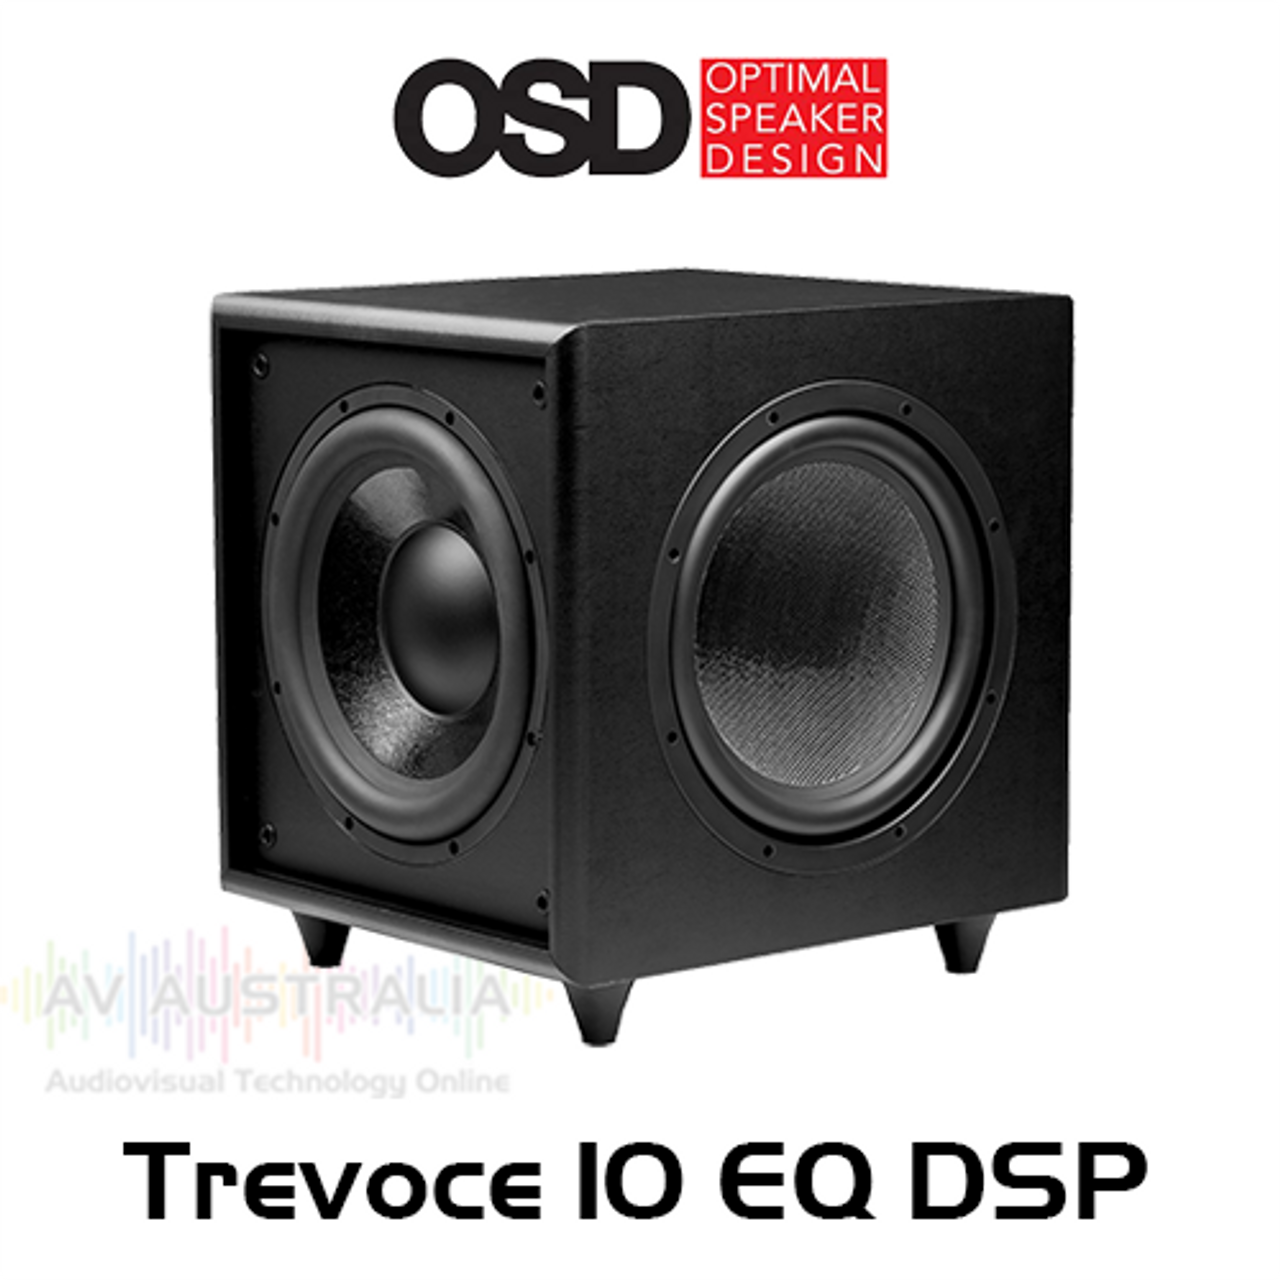 OSD Black TreVoce10 EQ DSP 10" 500W Dynamic Powered Subwoofer With Dual Passive Radiator